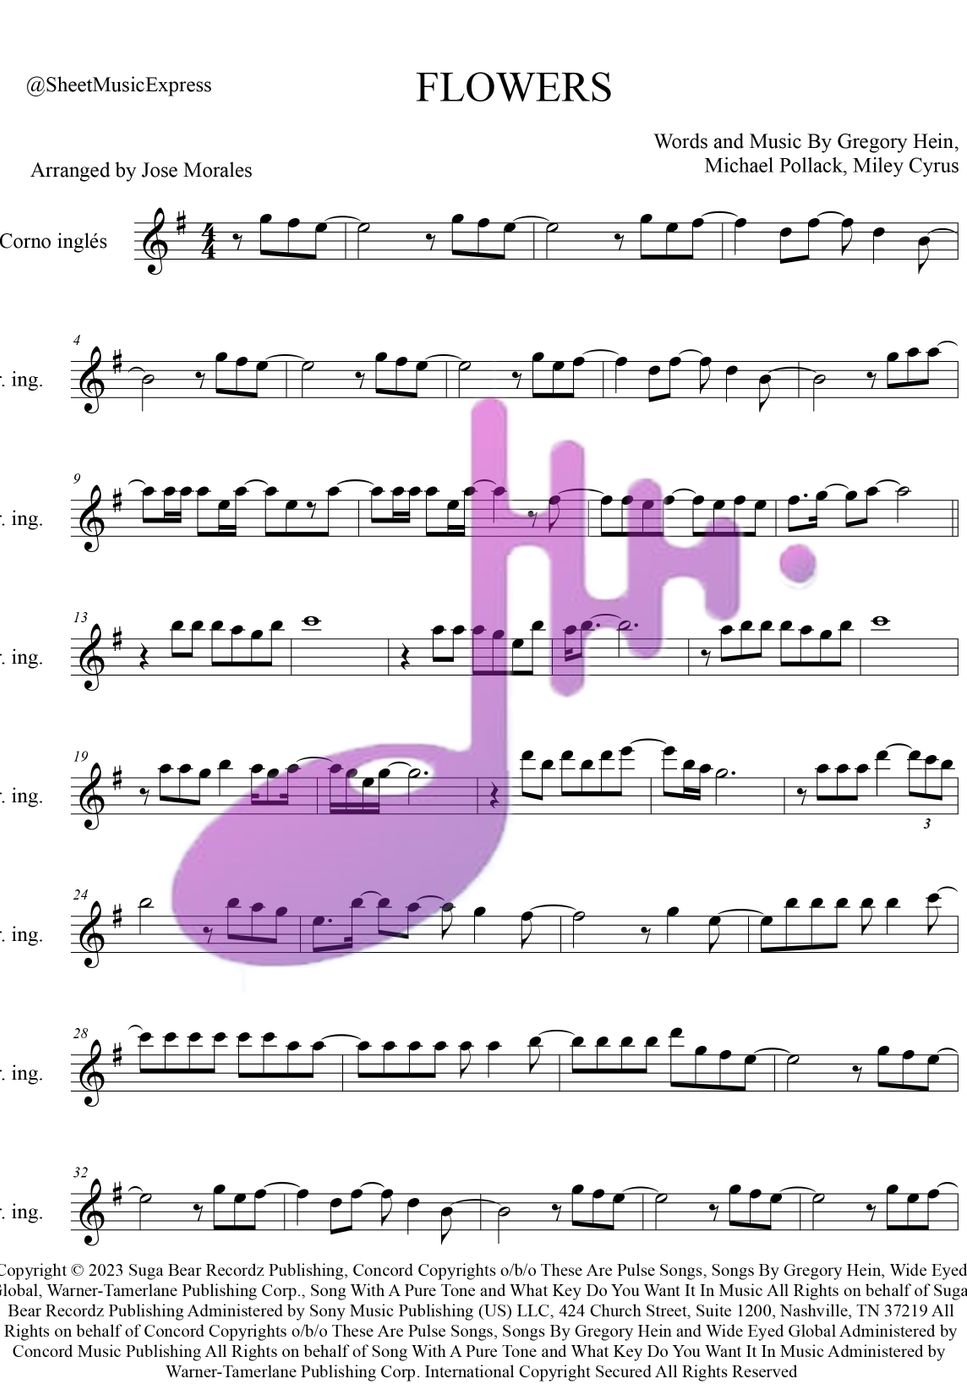 Miley Cyrus - Flowers - Miley Cyrus English Horn (Pop) by Sheet Music Express